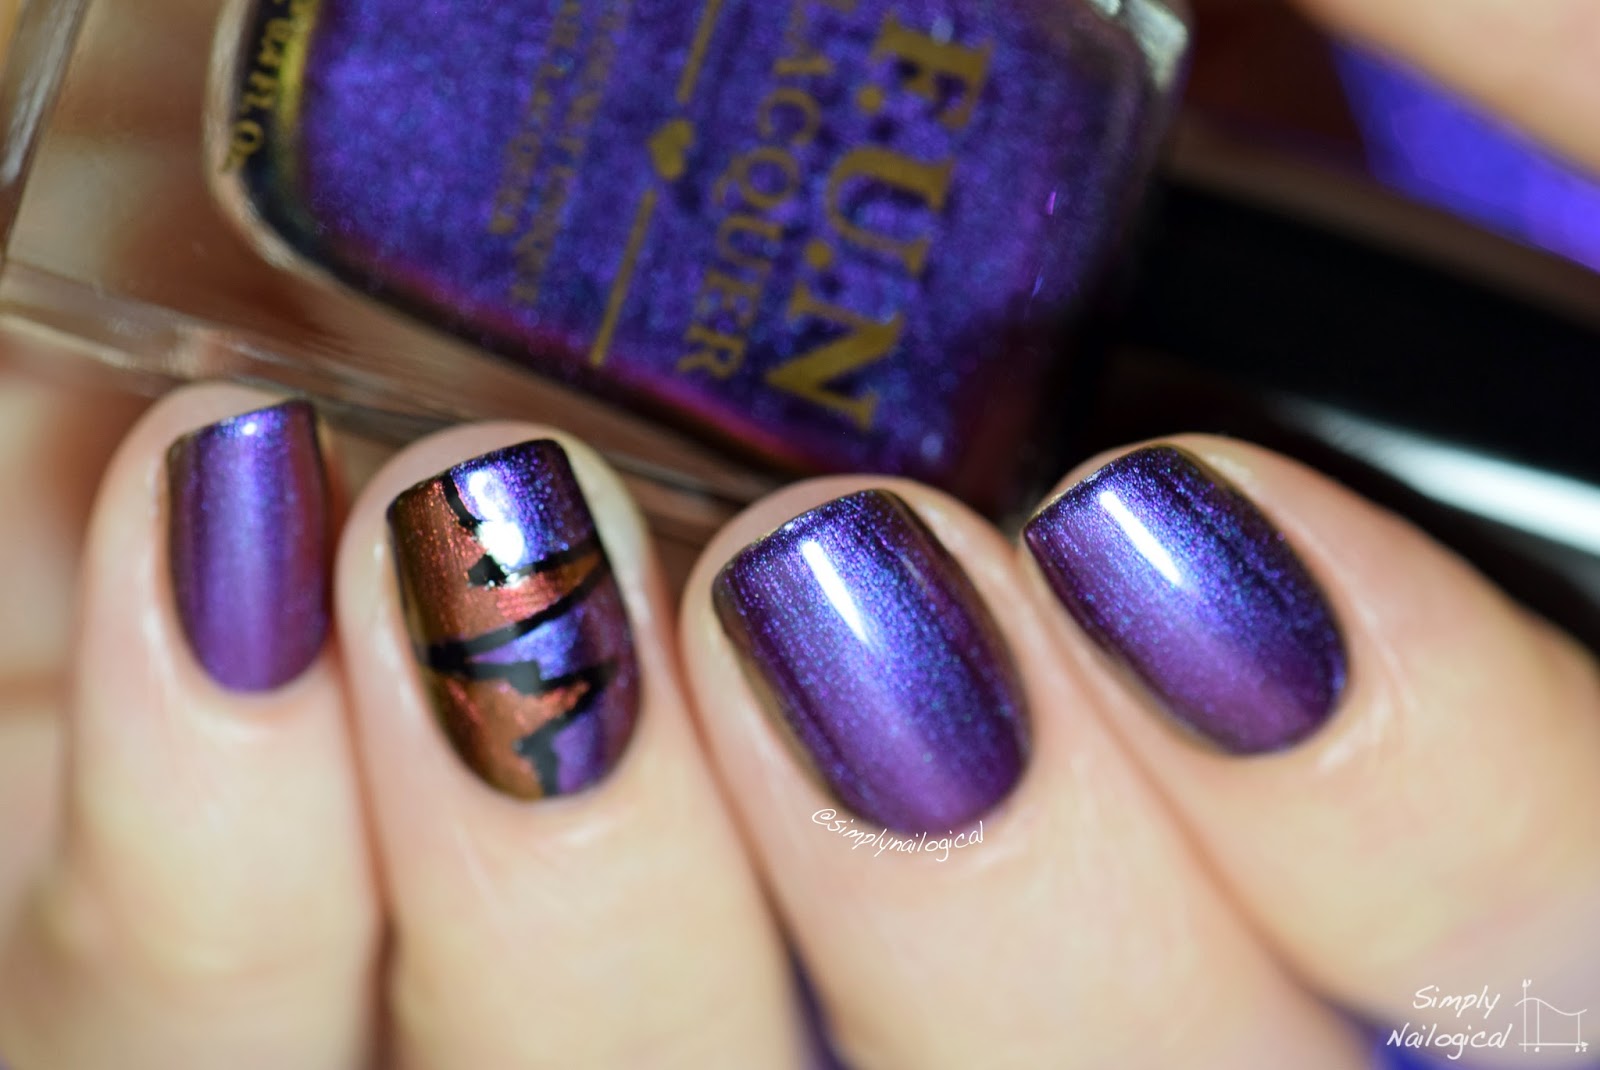 FUN Lacquer Reunion swatch